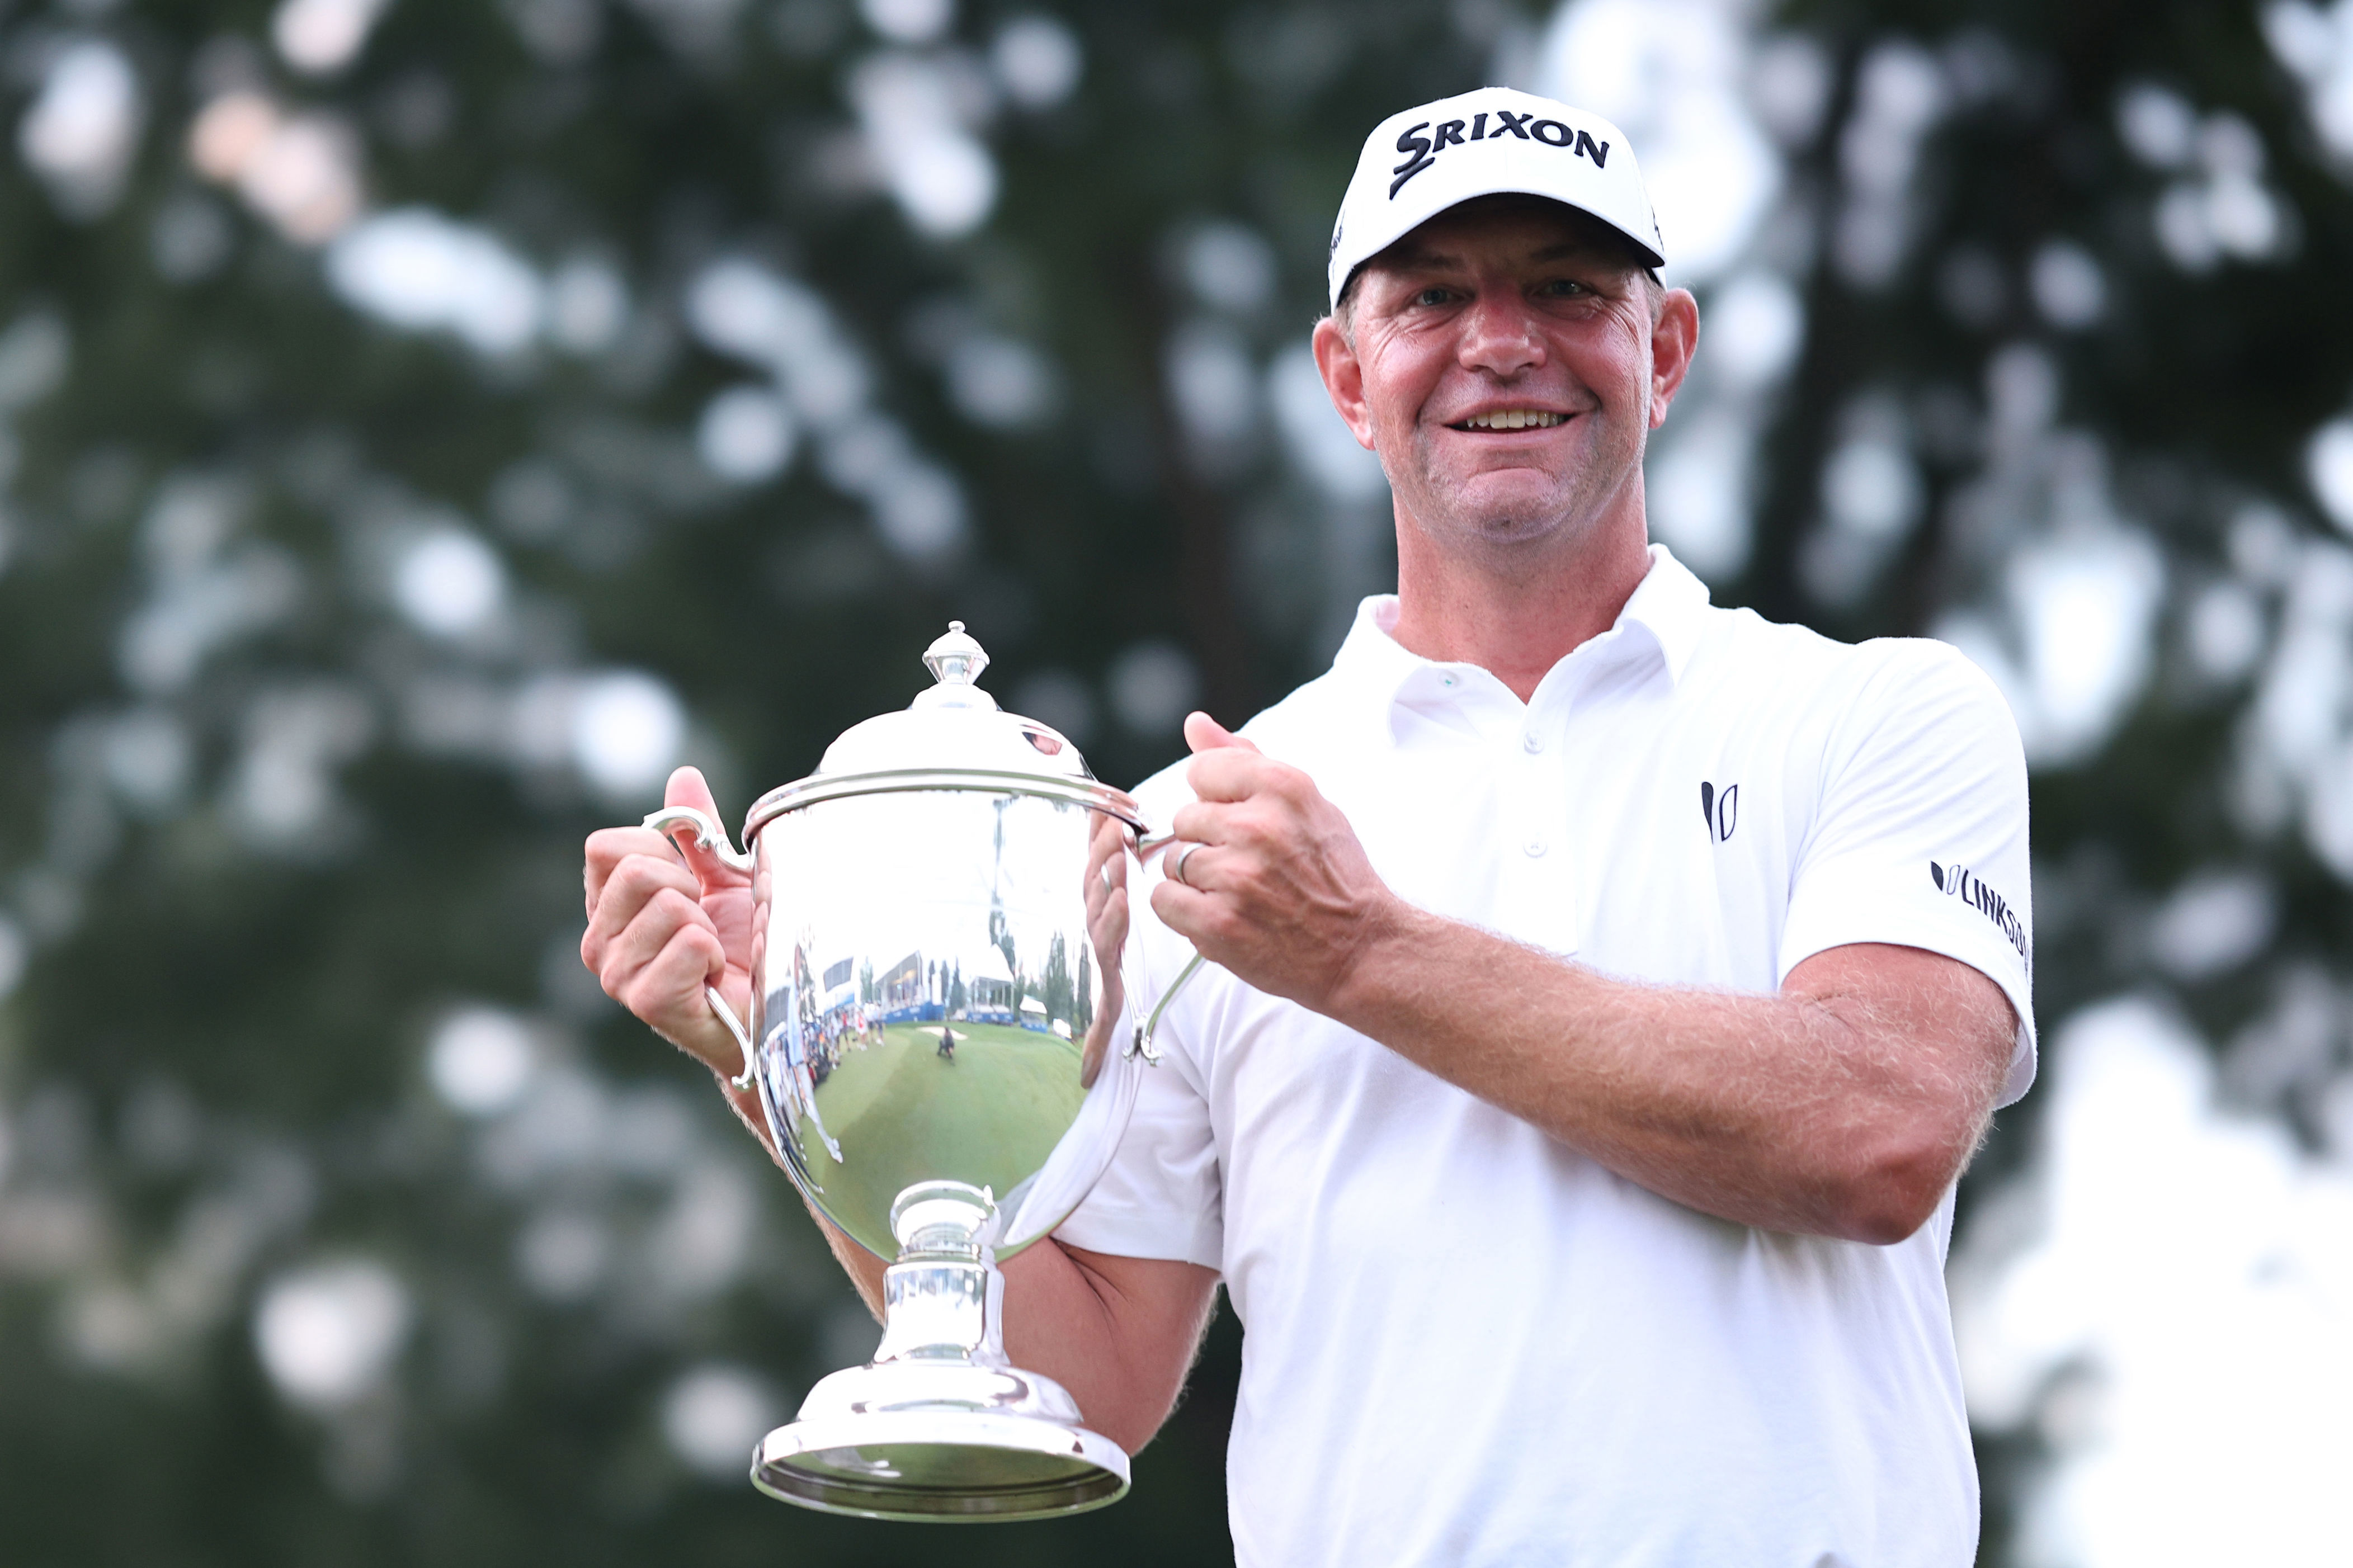 Lucas Glover yips to win 2023 Wyndham Championship